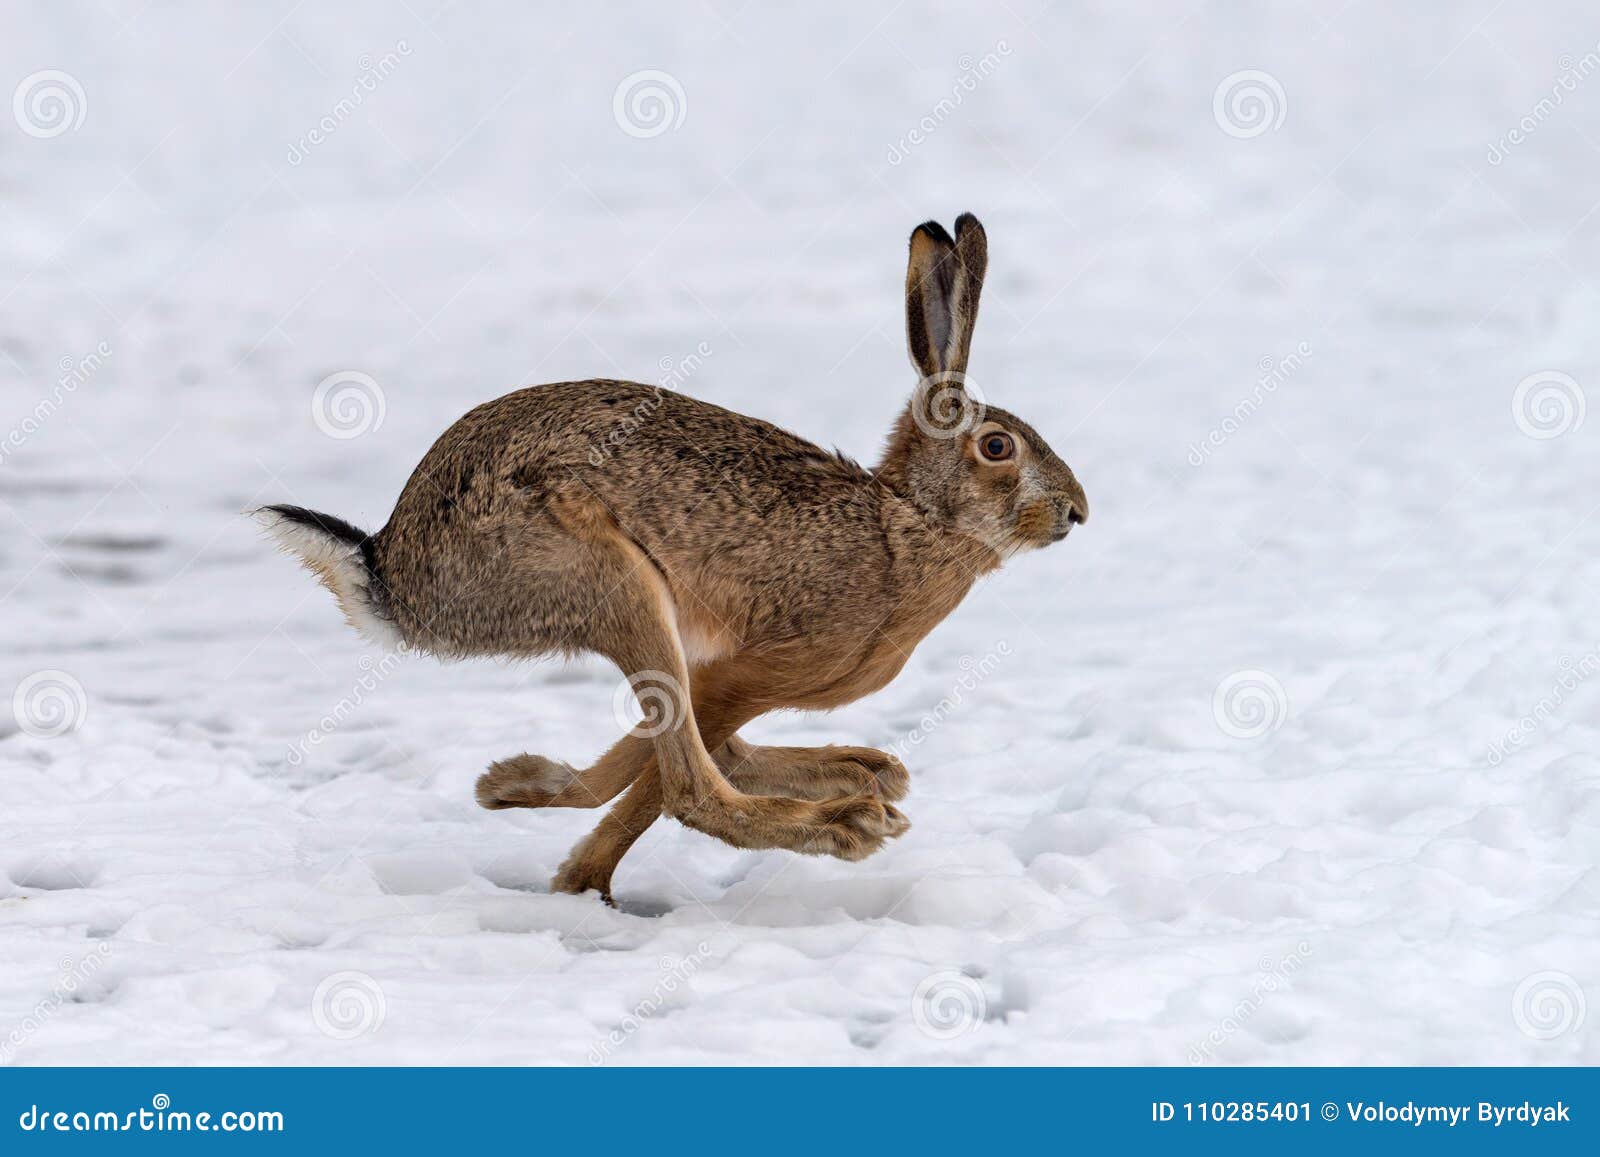 hare running in the field